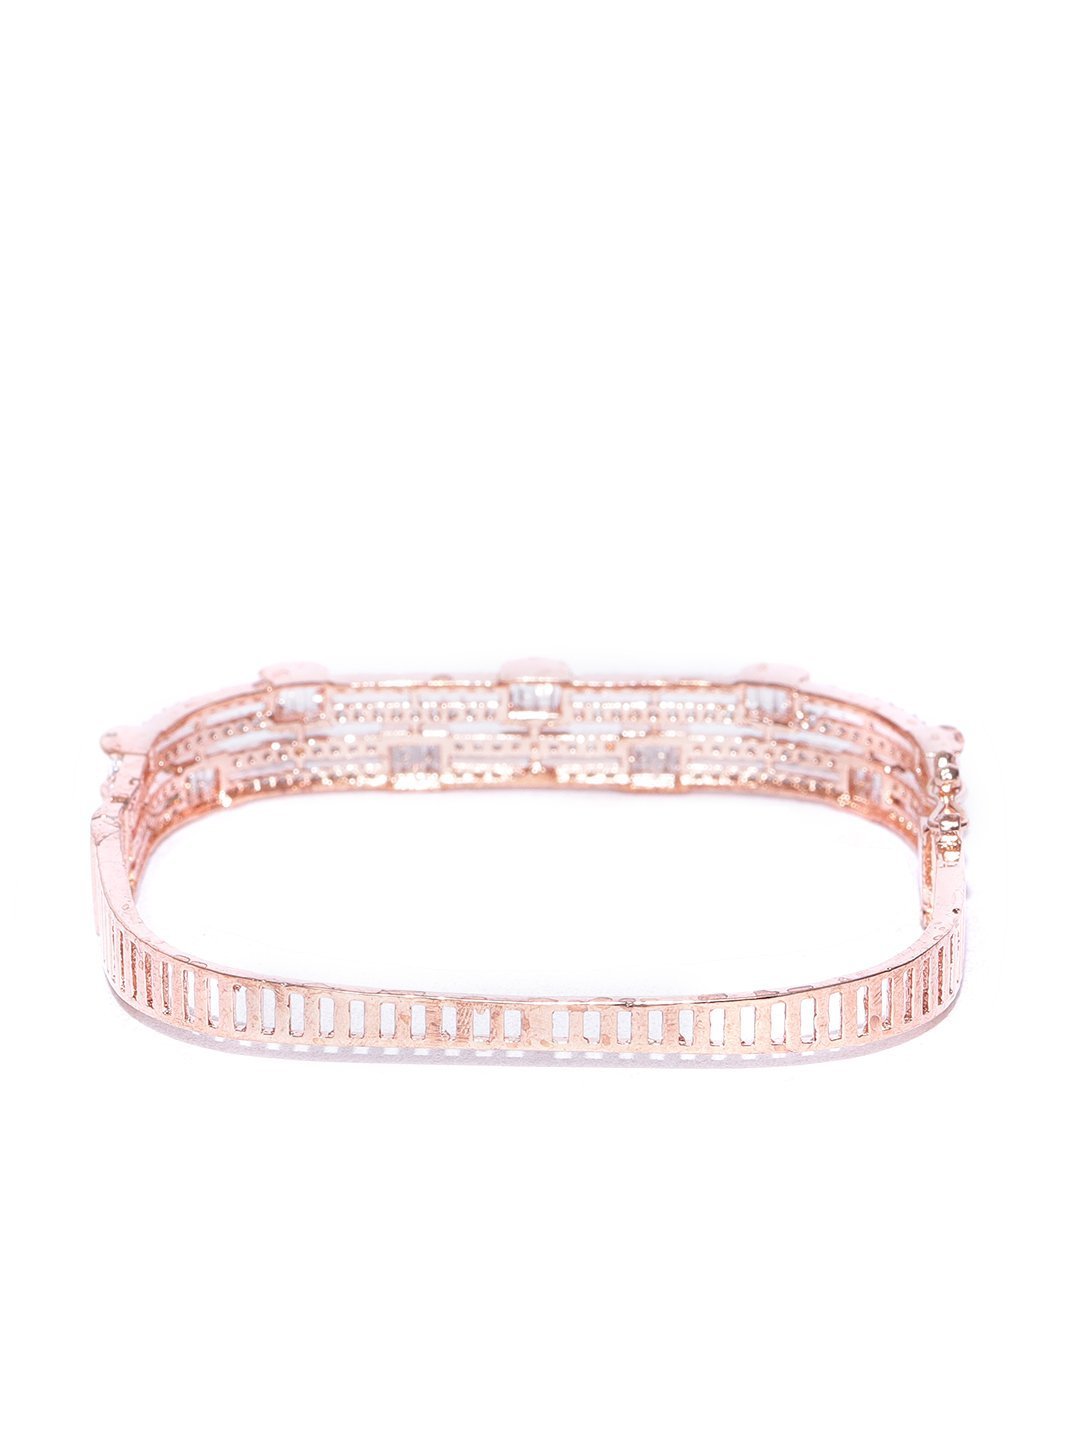 Women's Rose Gold-Plated American Diamond Studded Bracelet in Square Shape - Priyaasi